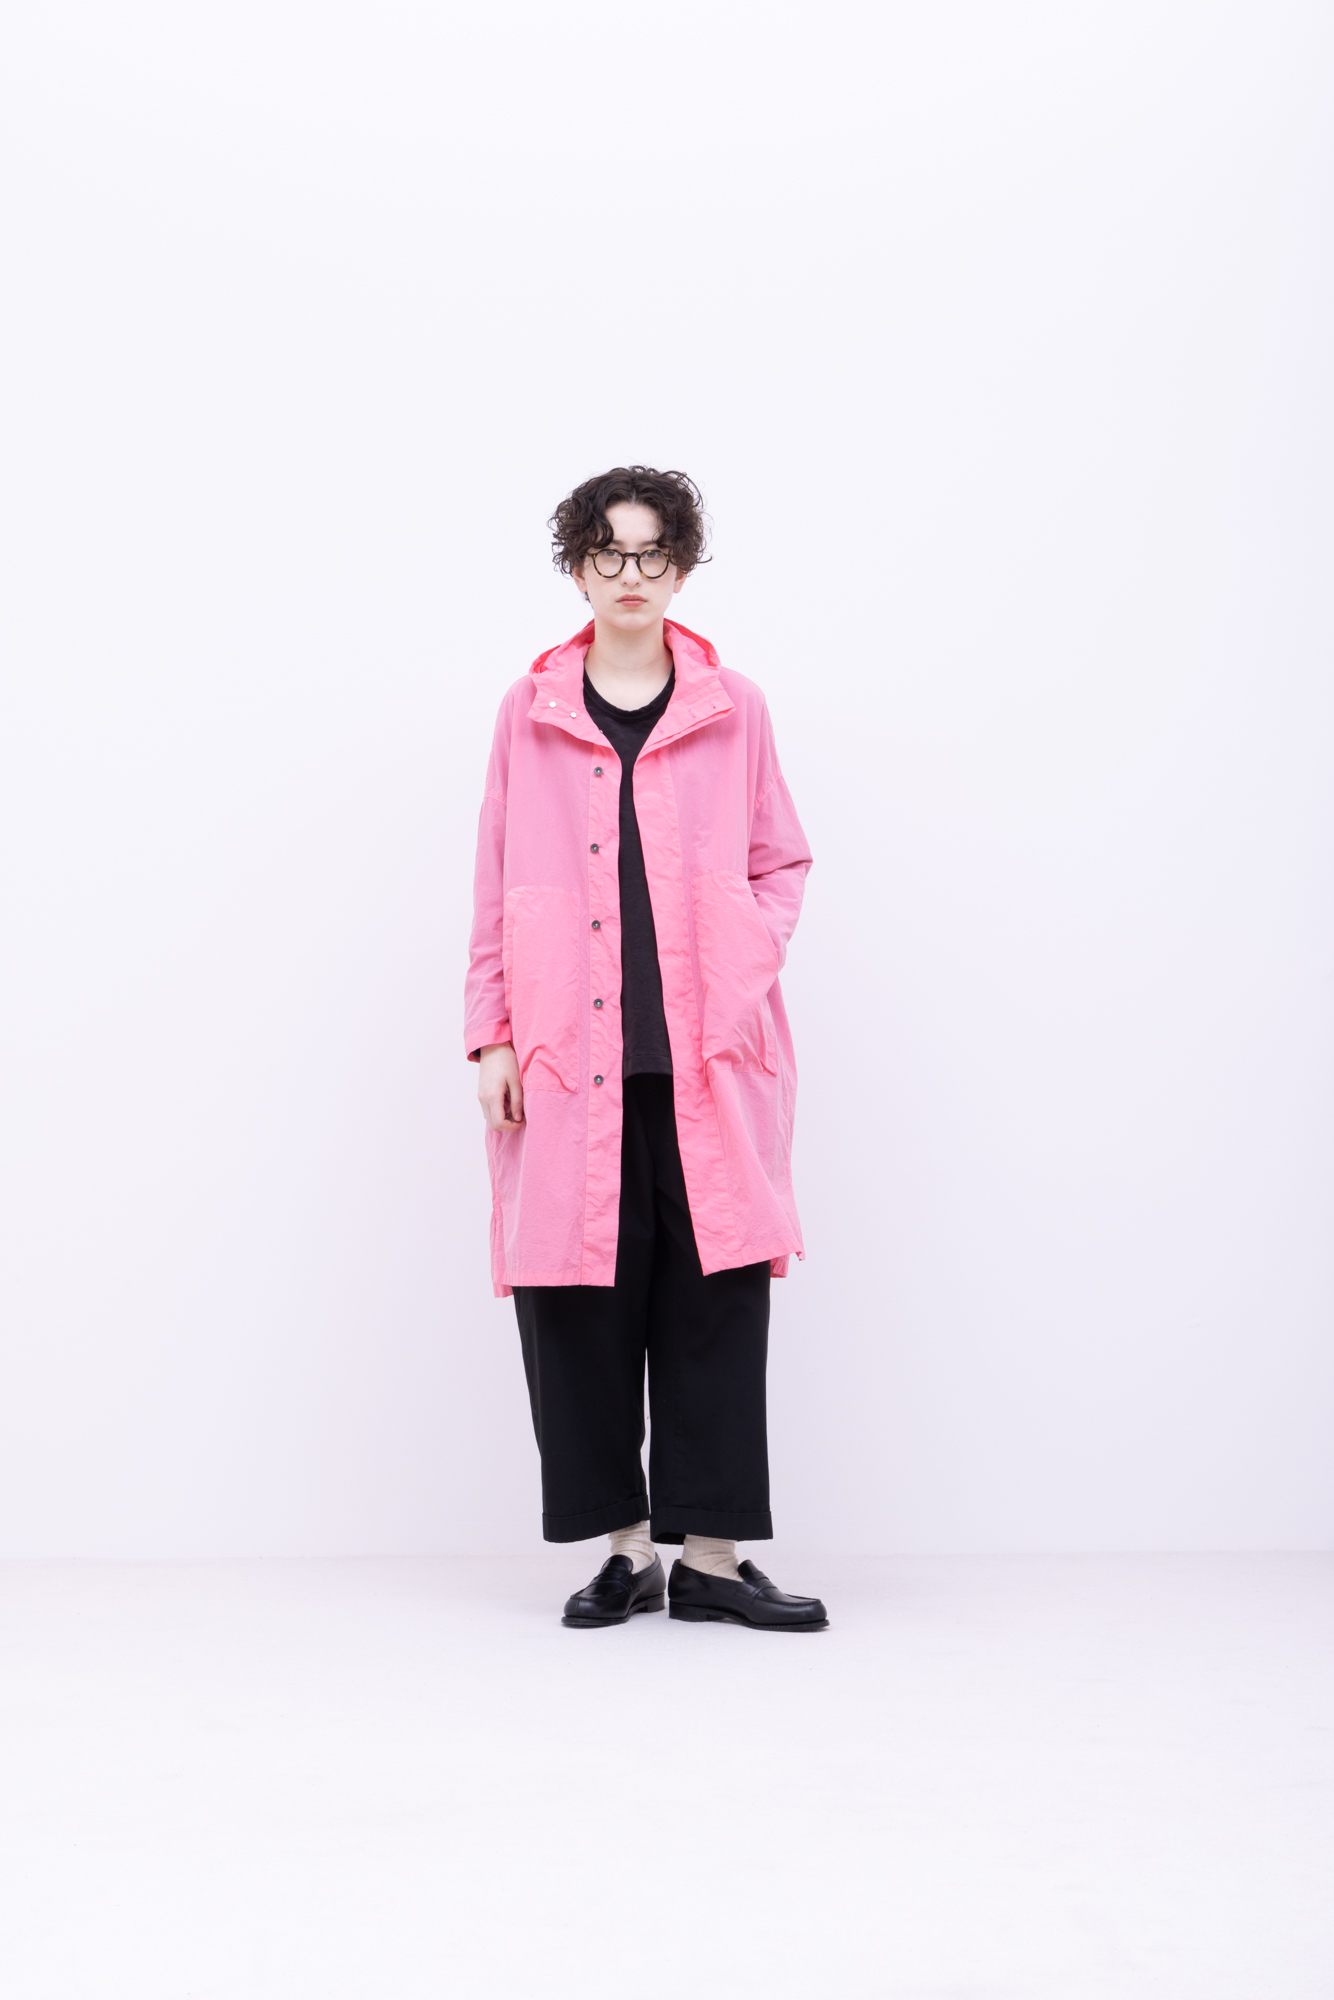 No. 031 | 2023 AW WOMENS / Model H=169cm | LOOK | FIRMUM